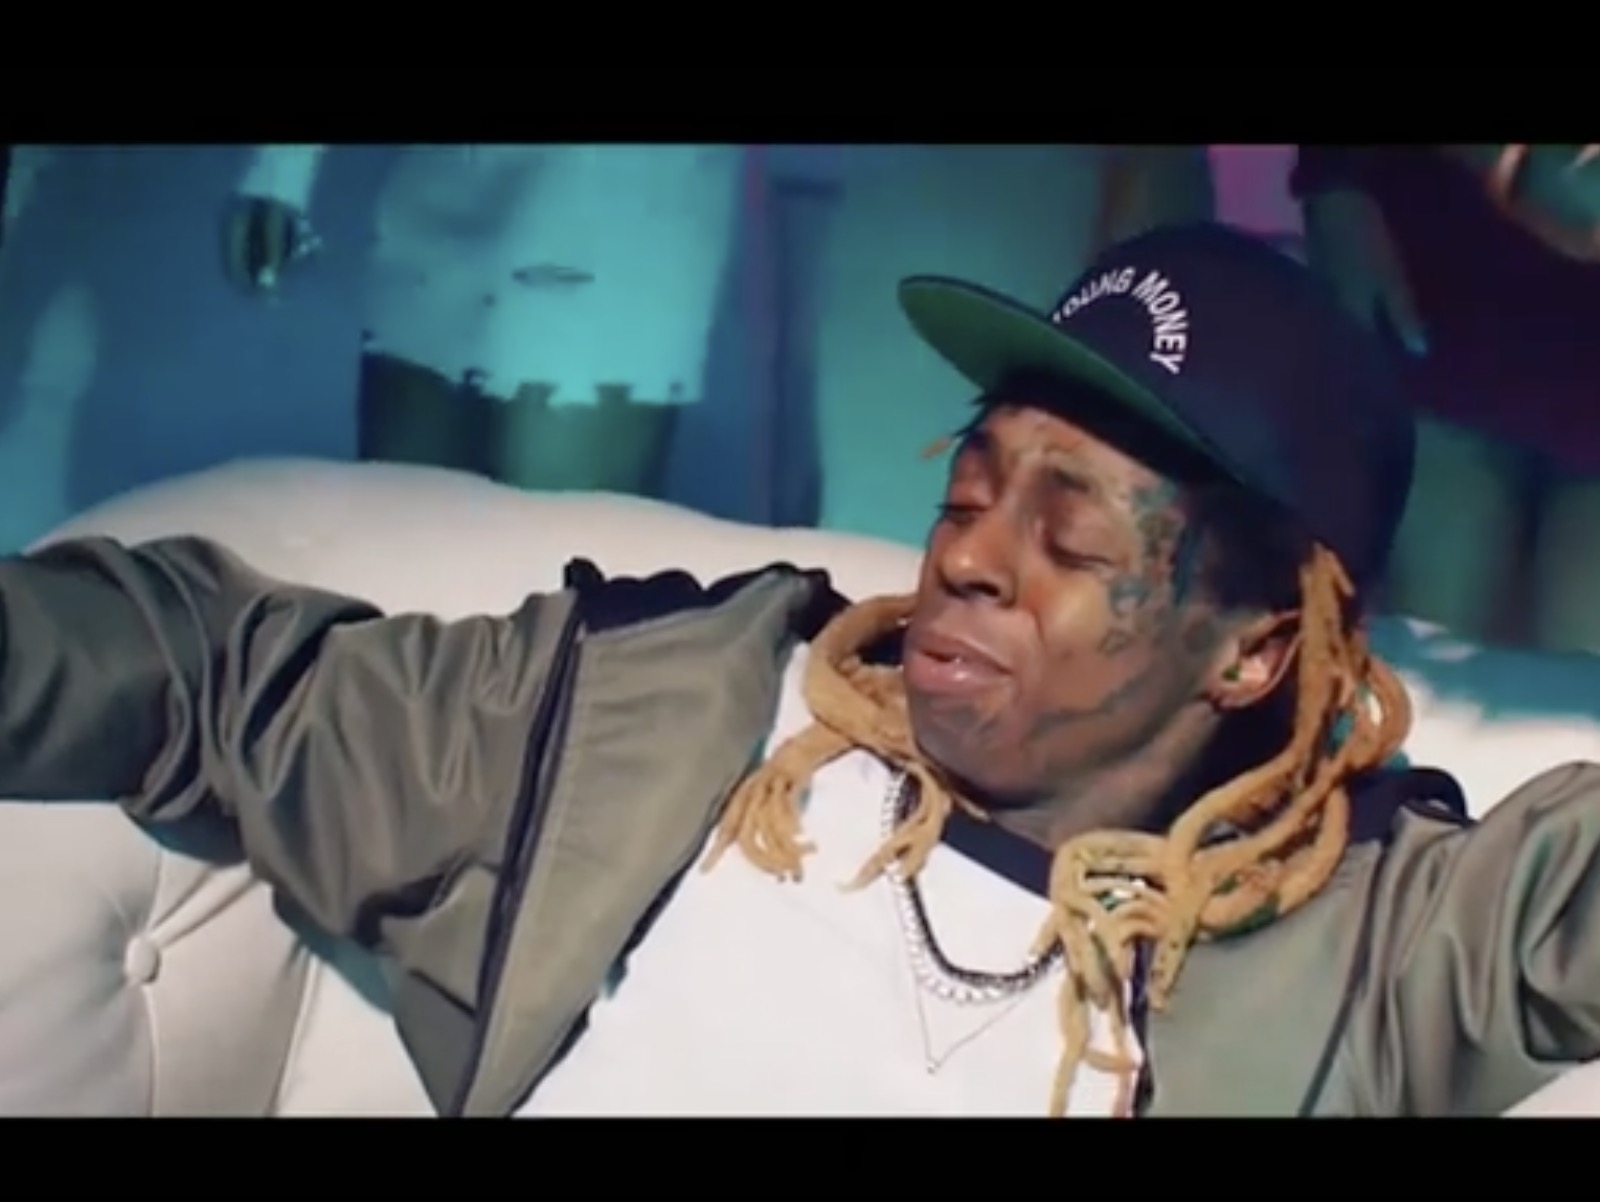 Watch: Lil Wayne Labels Himself G.O.A.T. W/ The GOAT In New Bumbu Commercial1600 x 1202